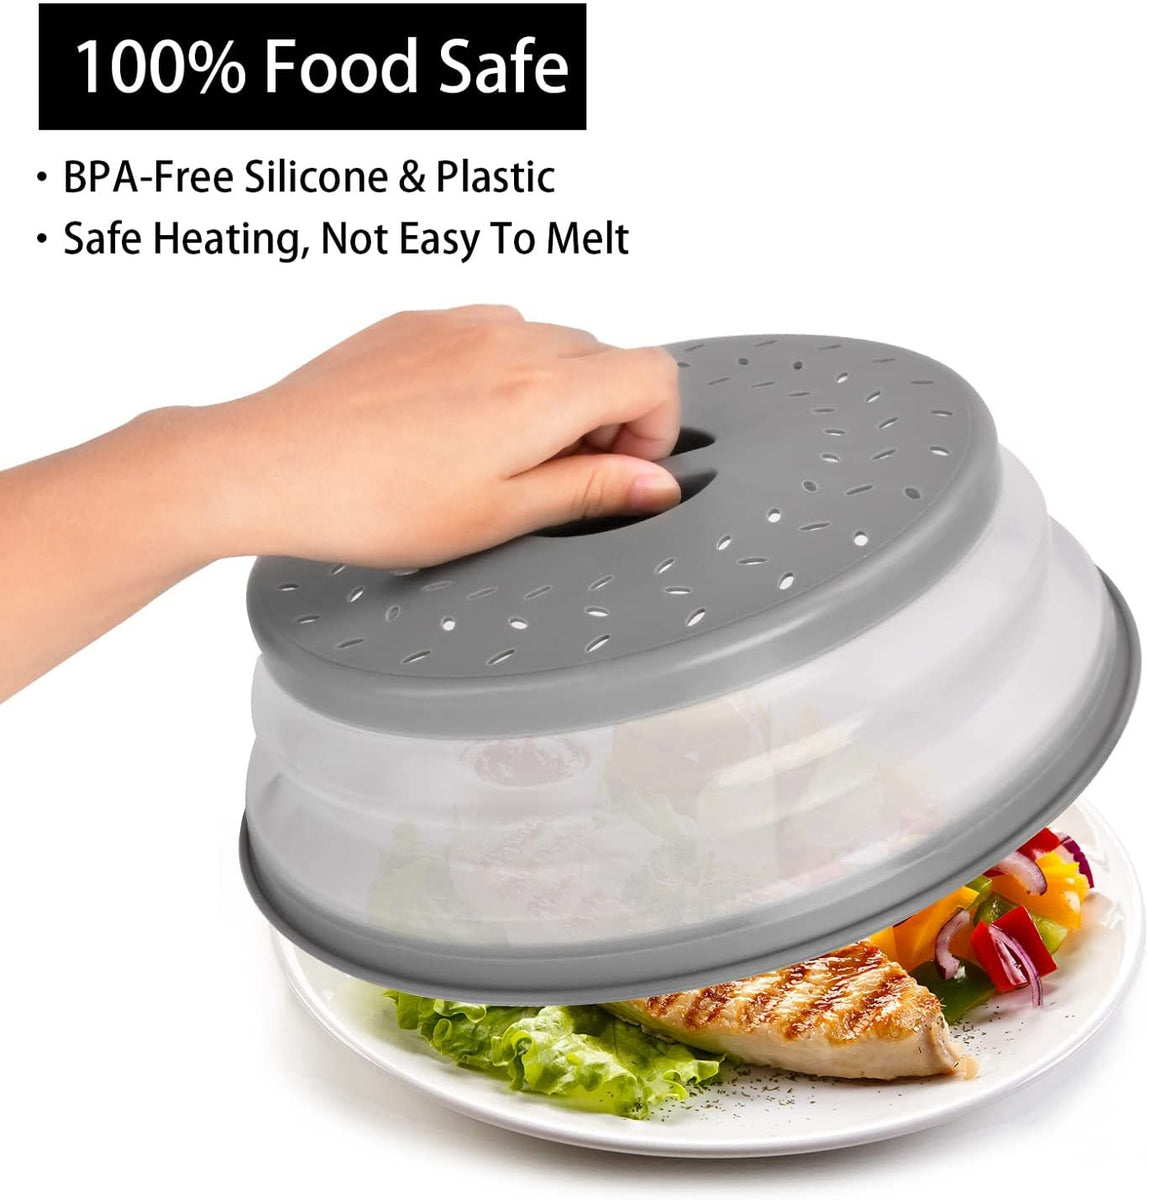 Niyofa Microwave Cover Foldable Microwave Lid with Hook Design  Multi-purpose Microwave Sleeve Collapsible Food Plate Cover BPA-Free &  Non-Toxic for